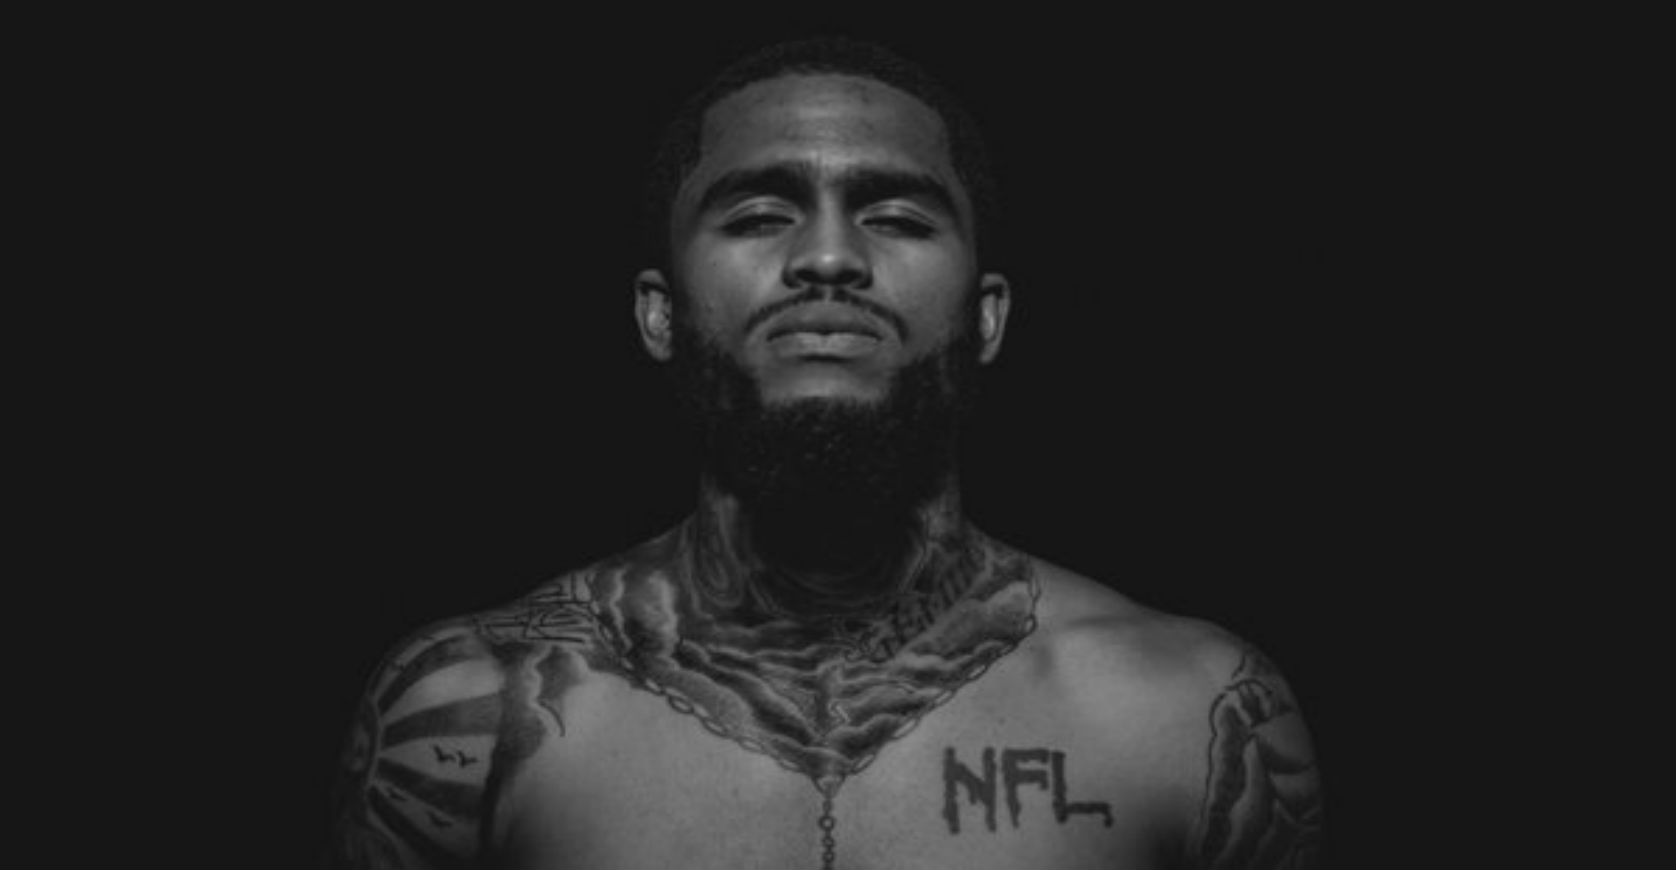 David Brewster, Jr. (born June 3, 1988), better known by his stage name Dave East, is an American rapper from East Harlem, New York. He gained attention in 2014 from his mixtape Black Rose. Since the release of his mixtape, East has been signed to rapper Nas' label Mass Appeal Records and has made a number of guest appearances. In 2016, East was chosen as part of the XXL magazine's 2016 Freshman Class. In September 2016, he signed to Def Jam Recordings.